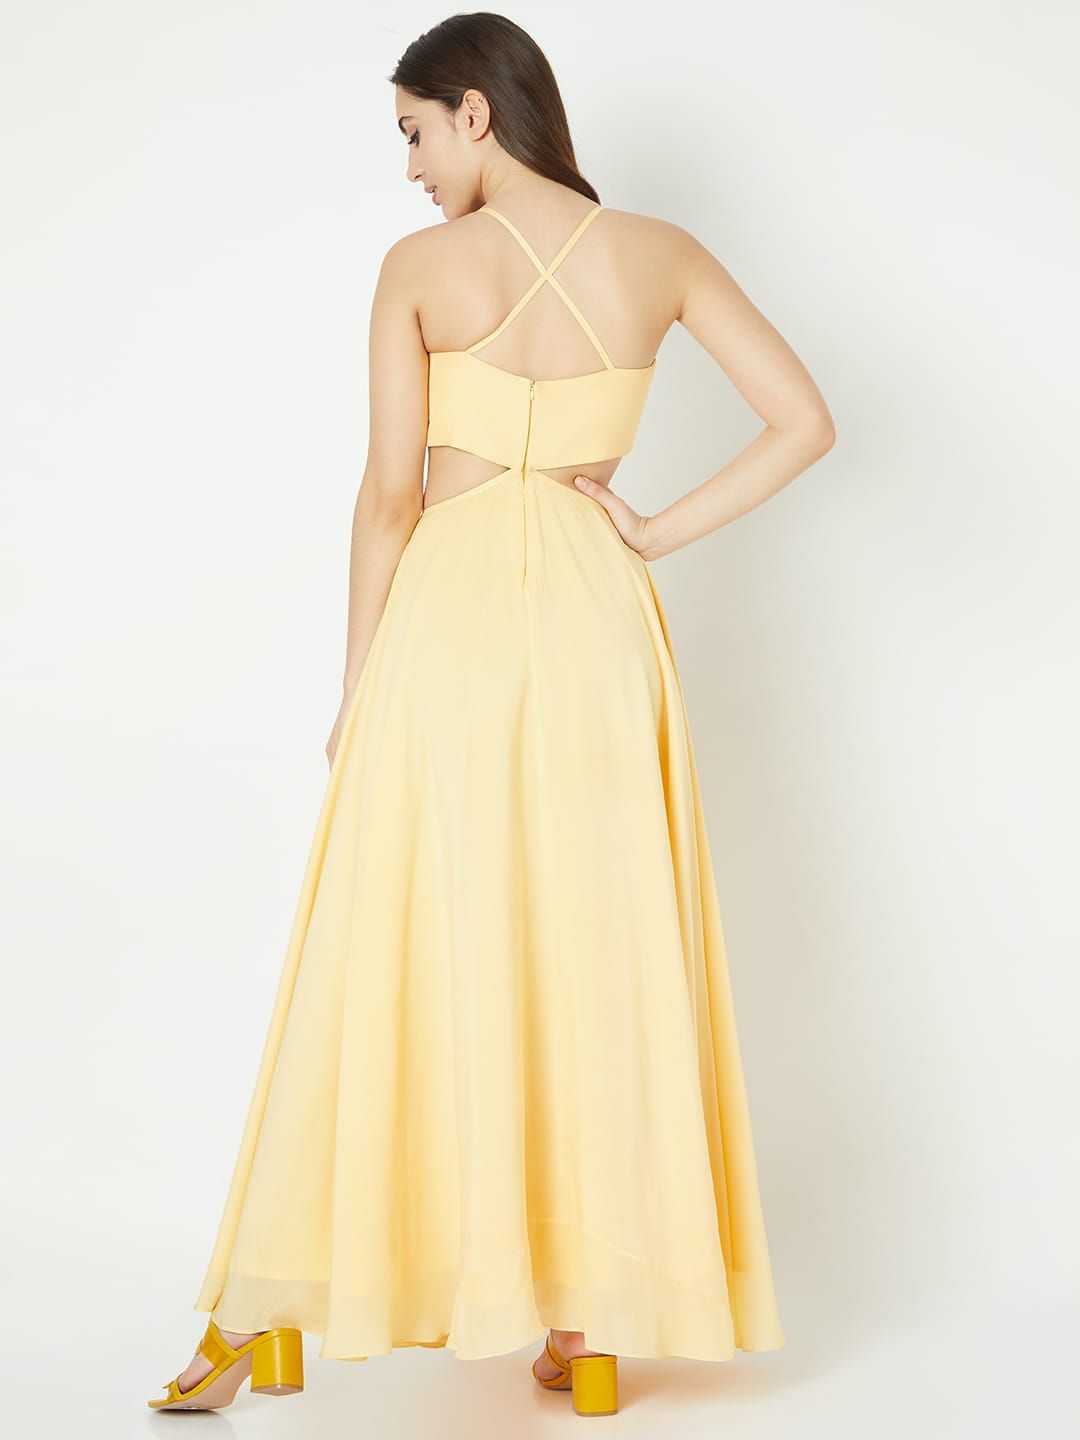 The Nima Resort Cocktail Gowns - Reema Anand Label